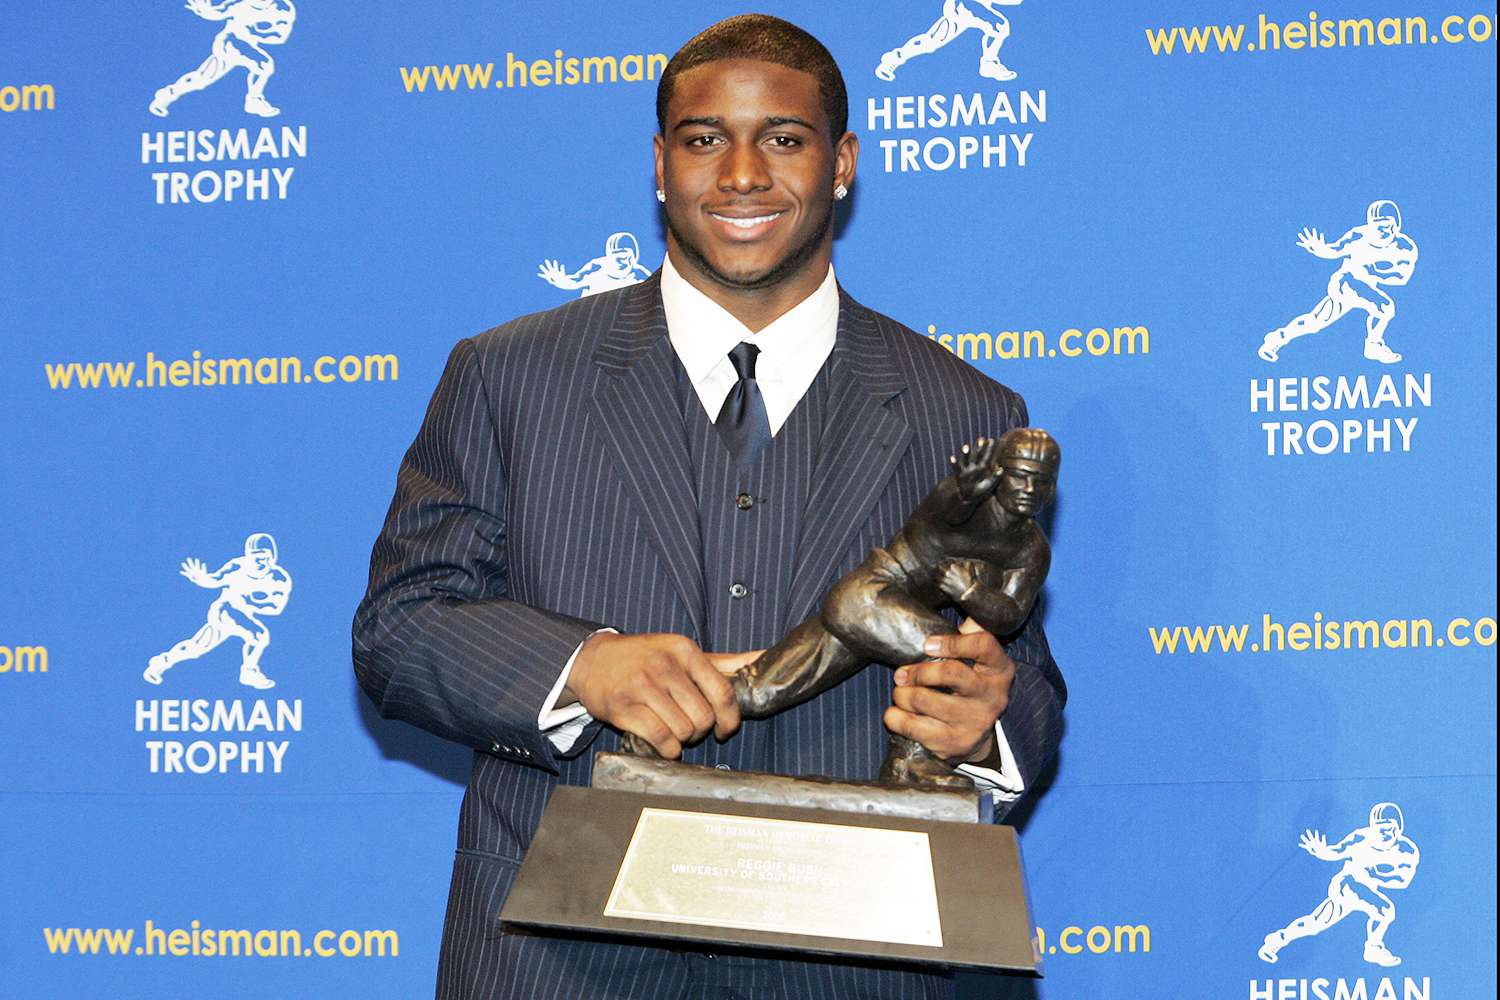 Reggie Bush, University of Southern California tailback holds the Heisman Trophy during the 2005 Heisman Trophy presentation at the Hard Rock Cafe in New York City, New York on December 10, 2005. Bush received 2,541 points in the ballot.